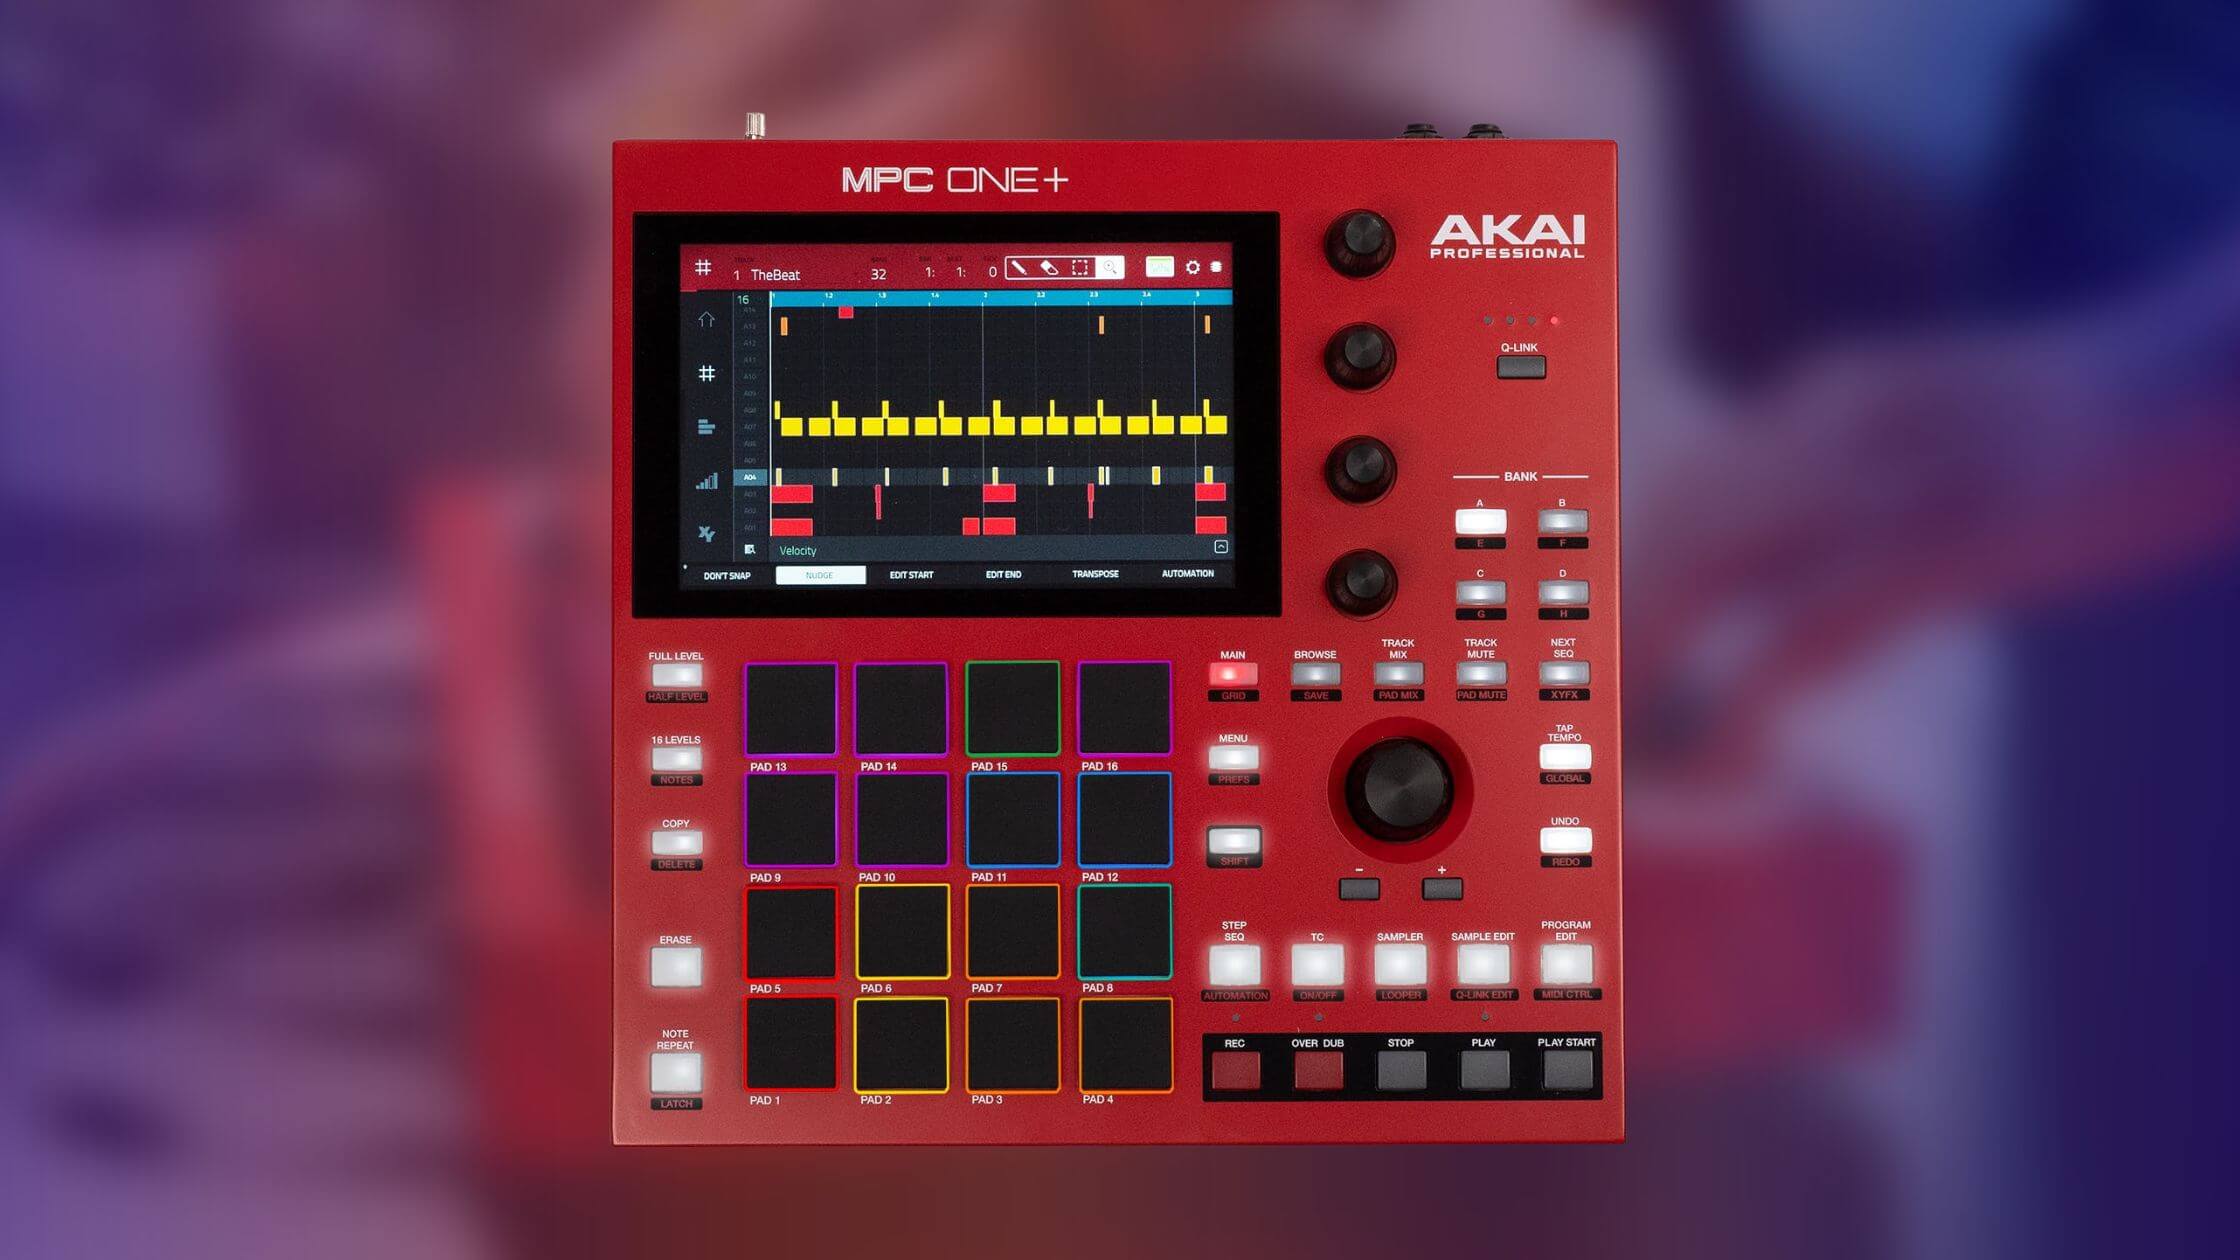 AKAI celebrates 35 years of MPC with MPC One + standalone sampler and sequencer